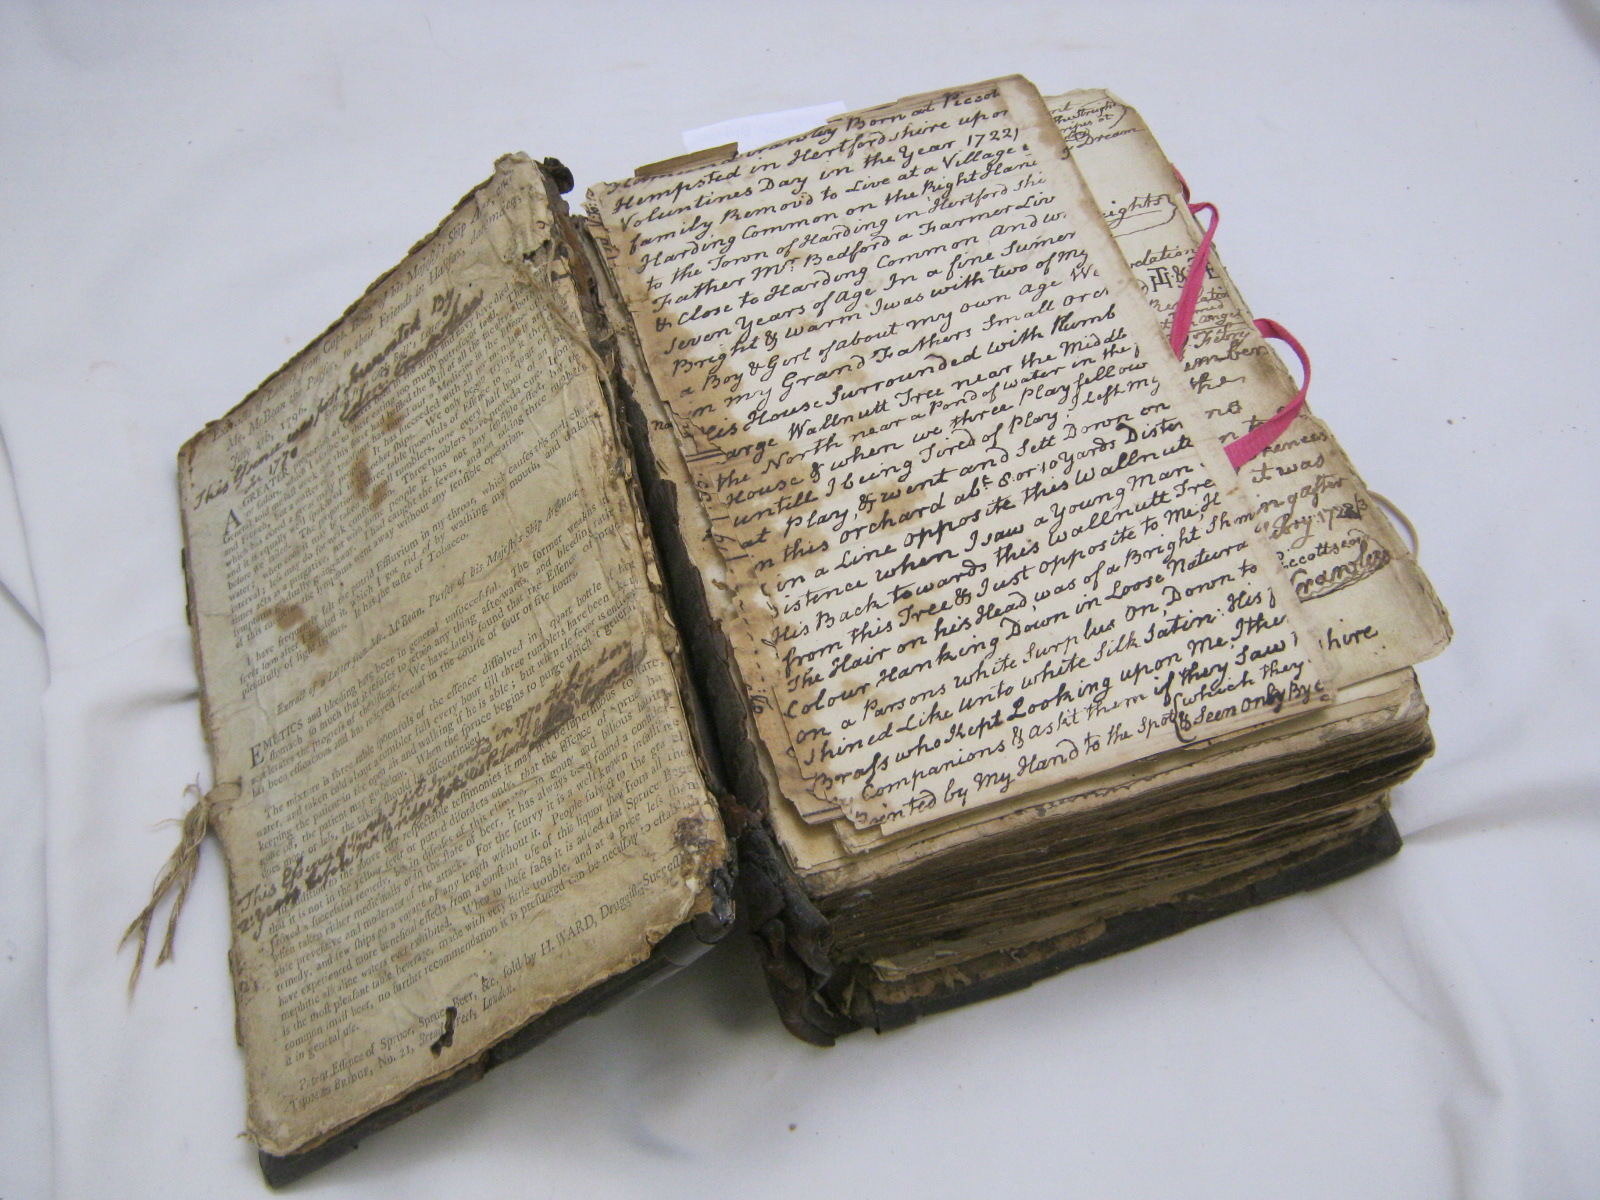 THE HOLY BIBLE ..., R, R Barker, 1615, a much distressed example, previous ownership of Edmund